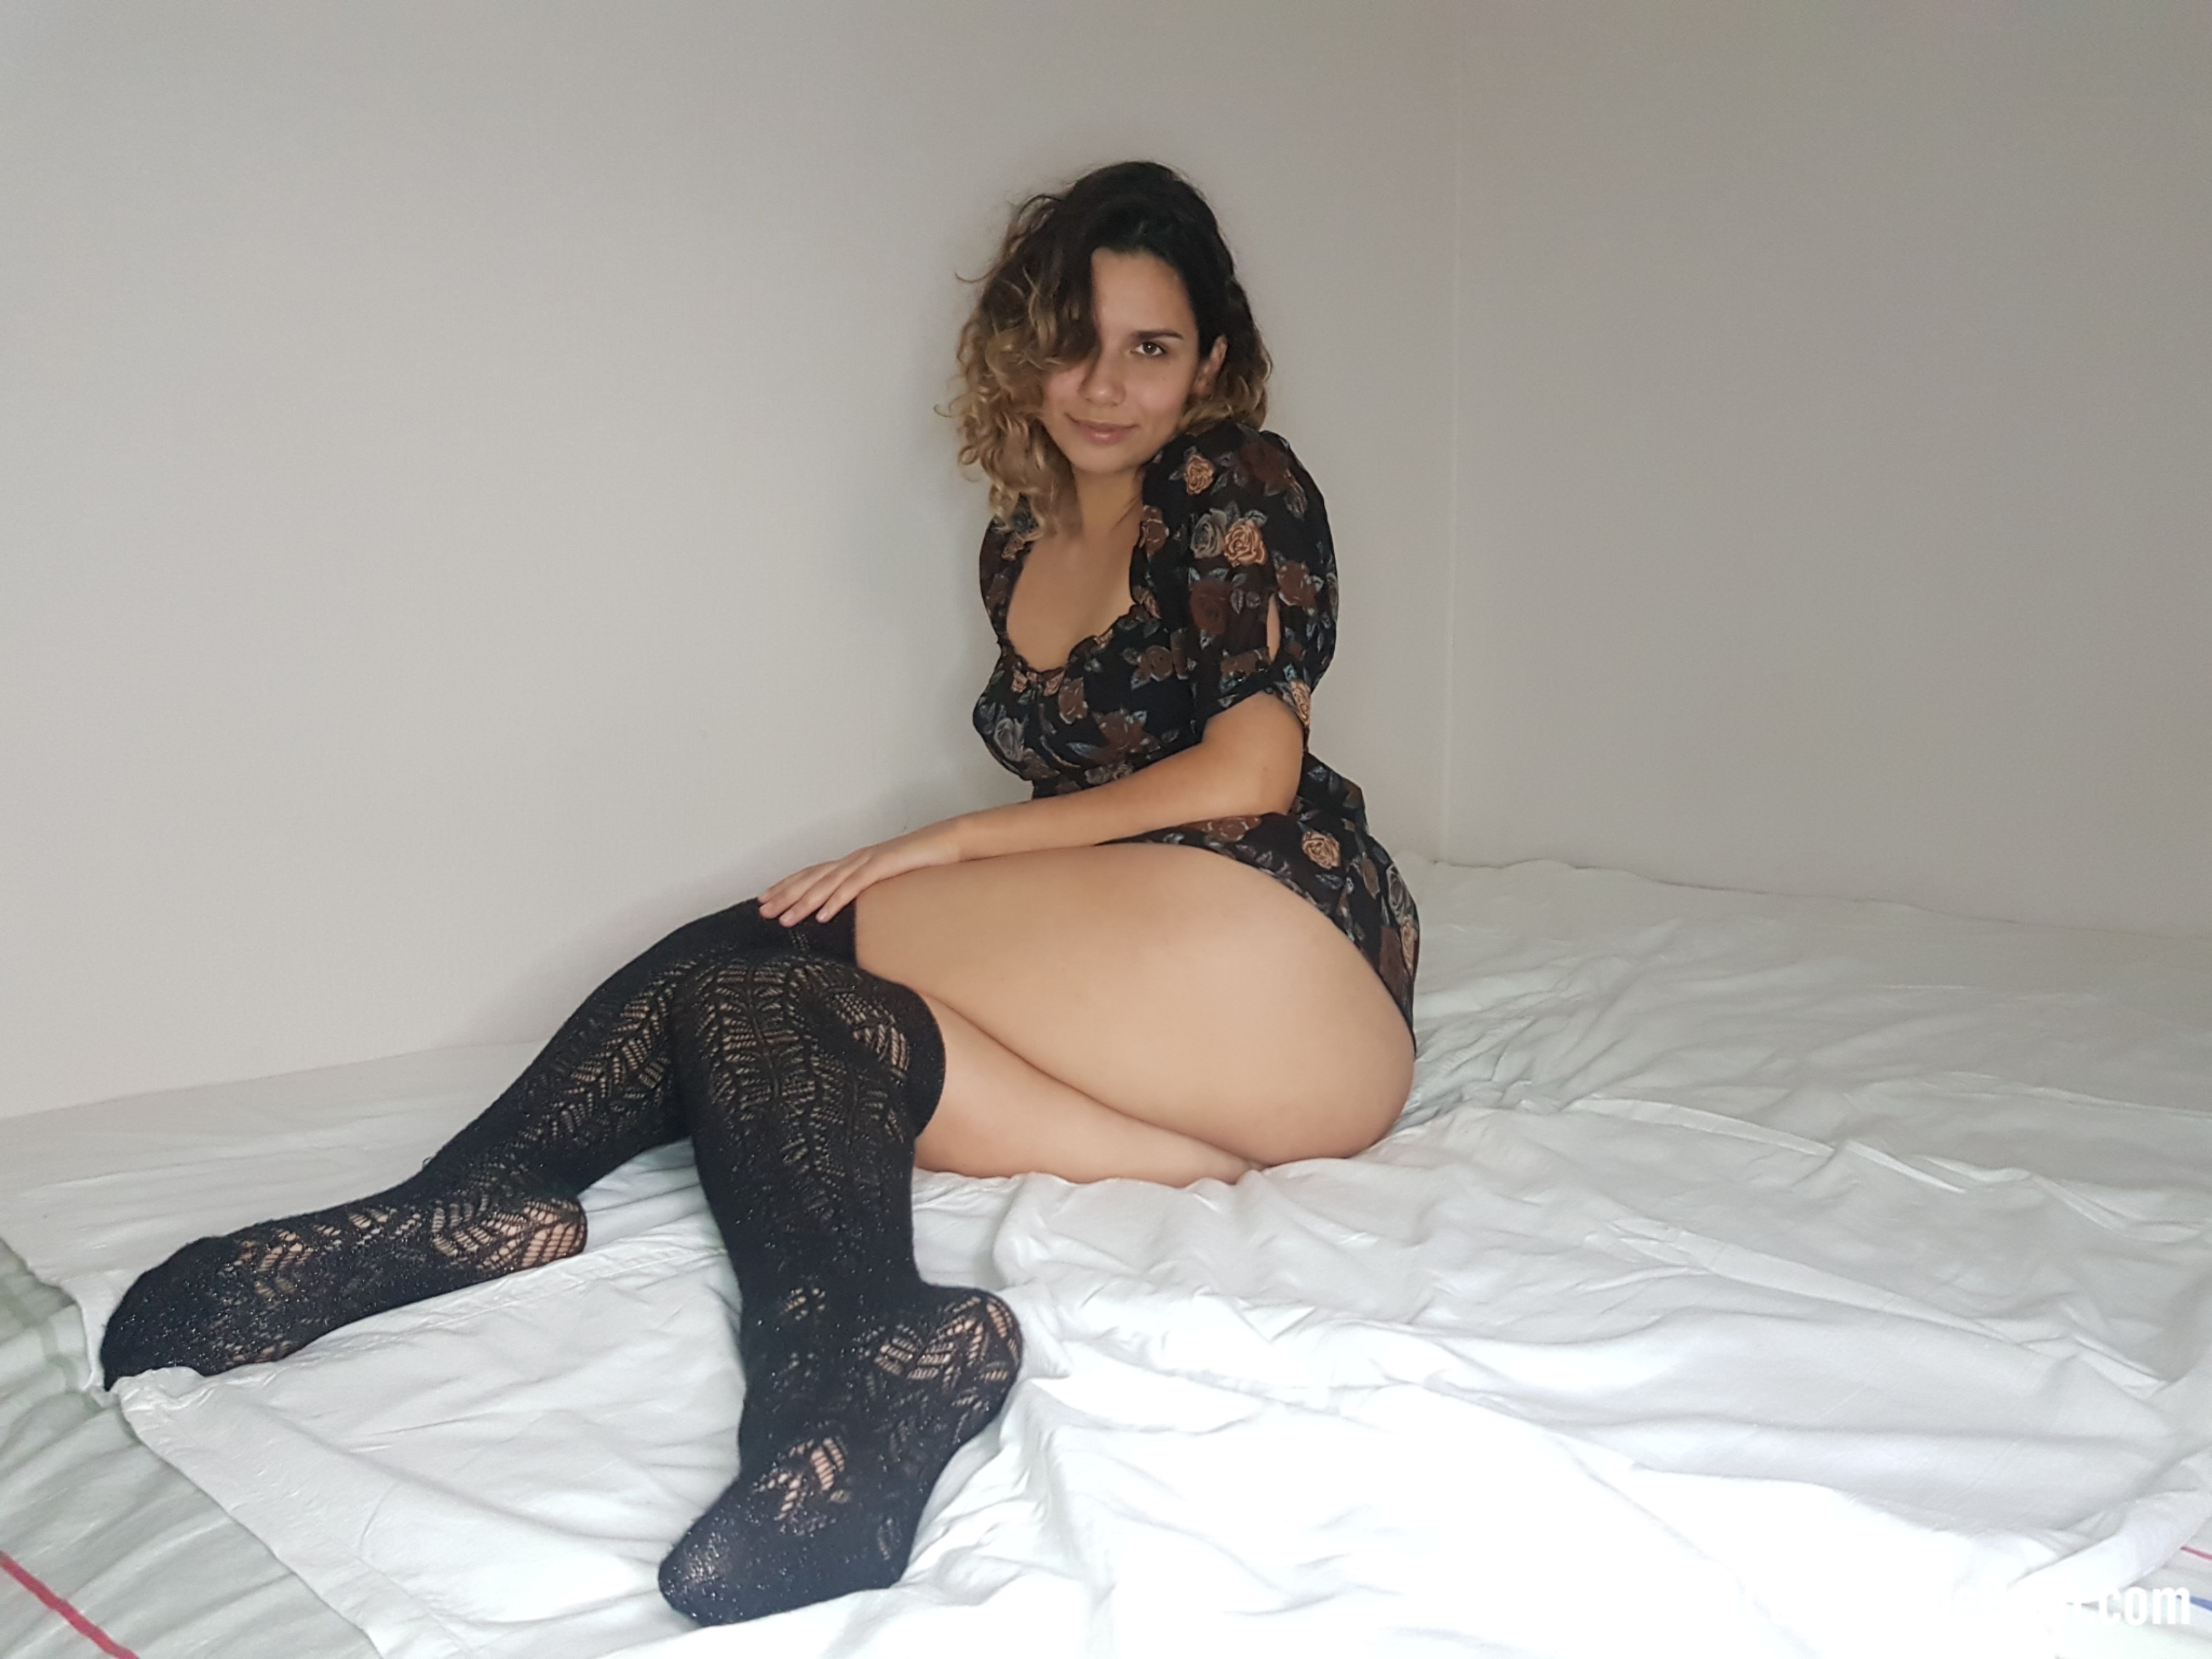 Mesmerizing beauty in lingerie wants your cock